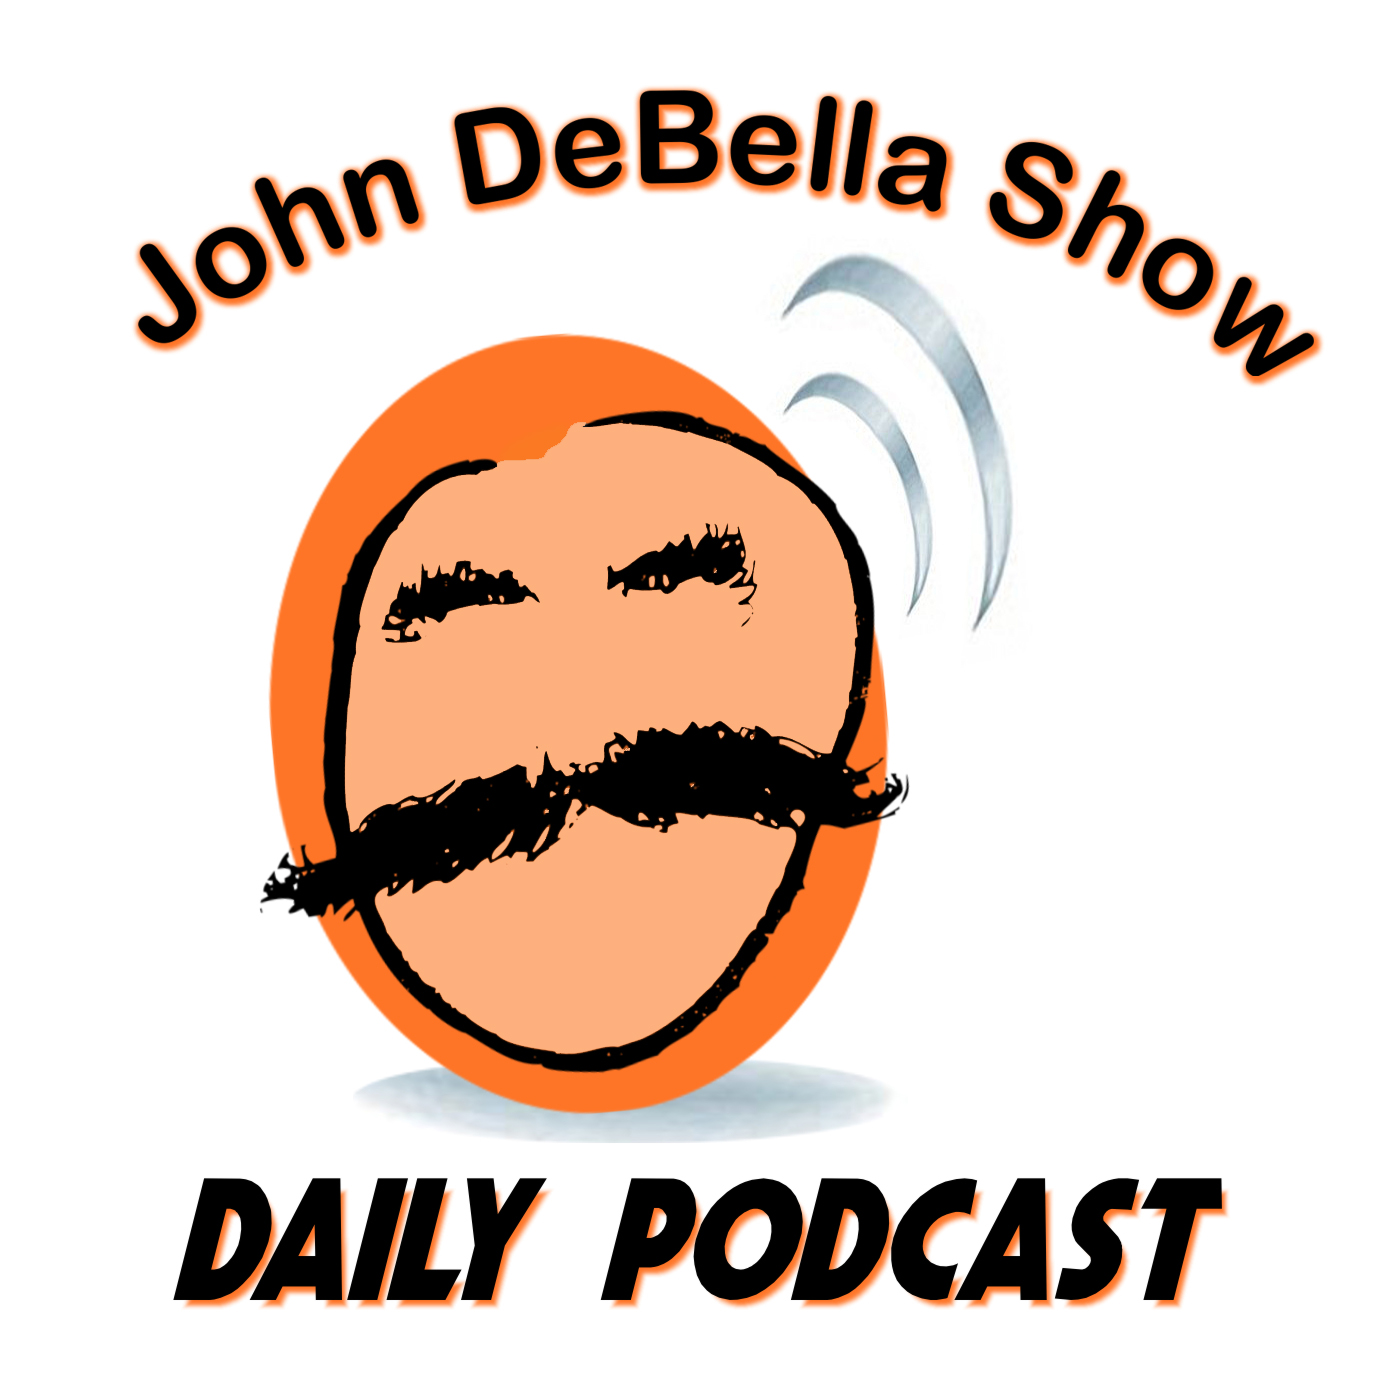 The Daily Podcast (06/23/21)